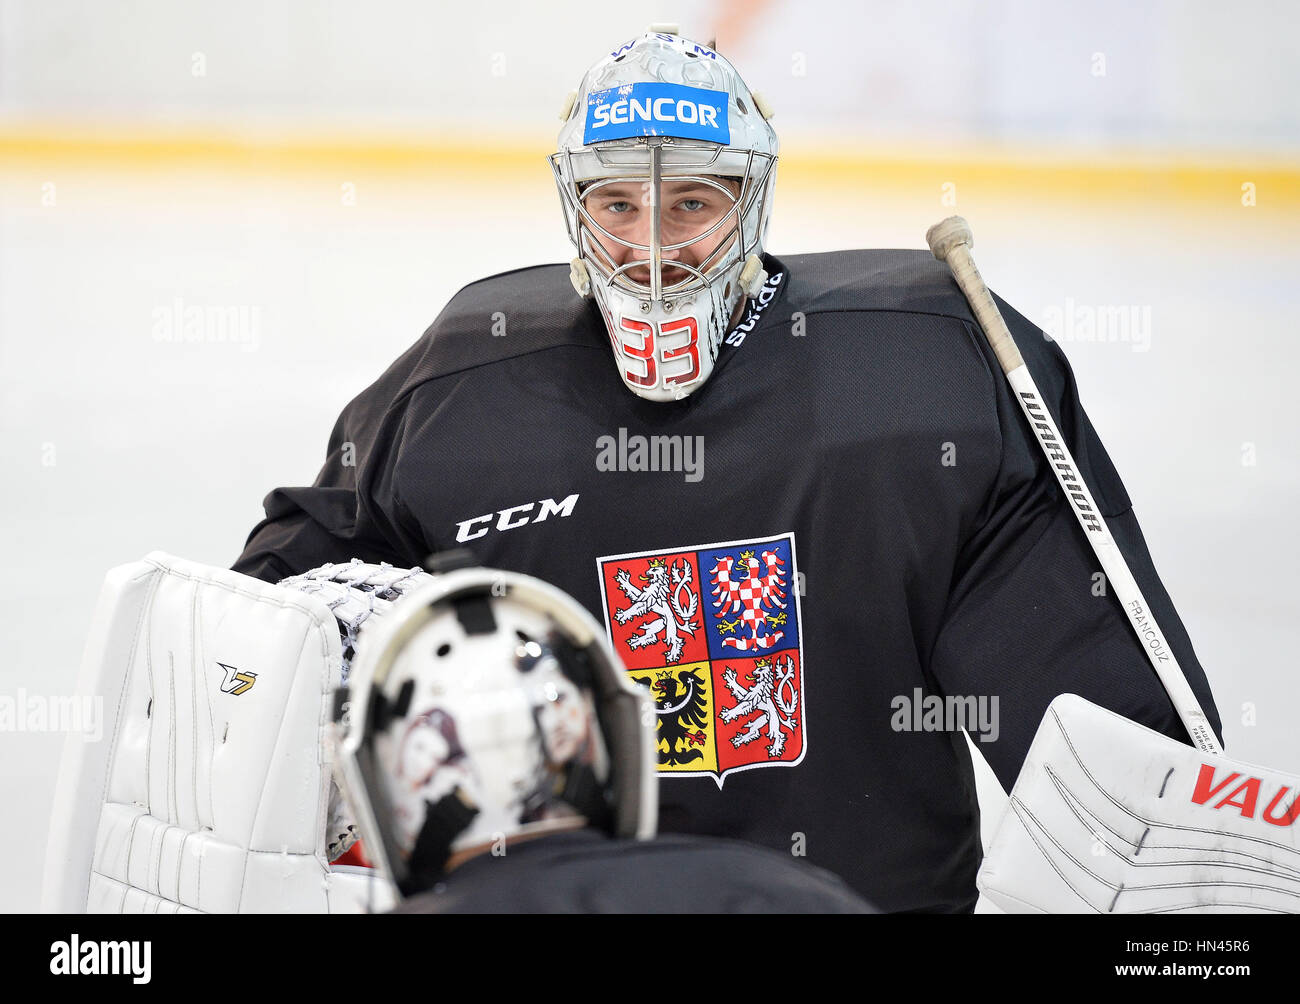 Prague, Czech Republic. 08th Feb, 2017. The Czech national ice-hockey team's player goalie Pavel Francouz in action during the training session prior to the February Sweden Games in Gothenburg in Prague, Czech Republic, February 8, 2017. Sweden Games, the third part of the European Hockey Tour (EHT) series, will take place on February 9-12. Credit: Katerina Sulova/CTK Photo/Alamy Live News Stock Photo